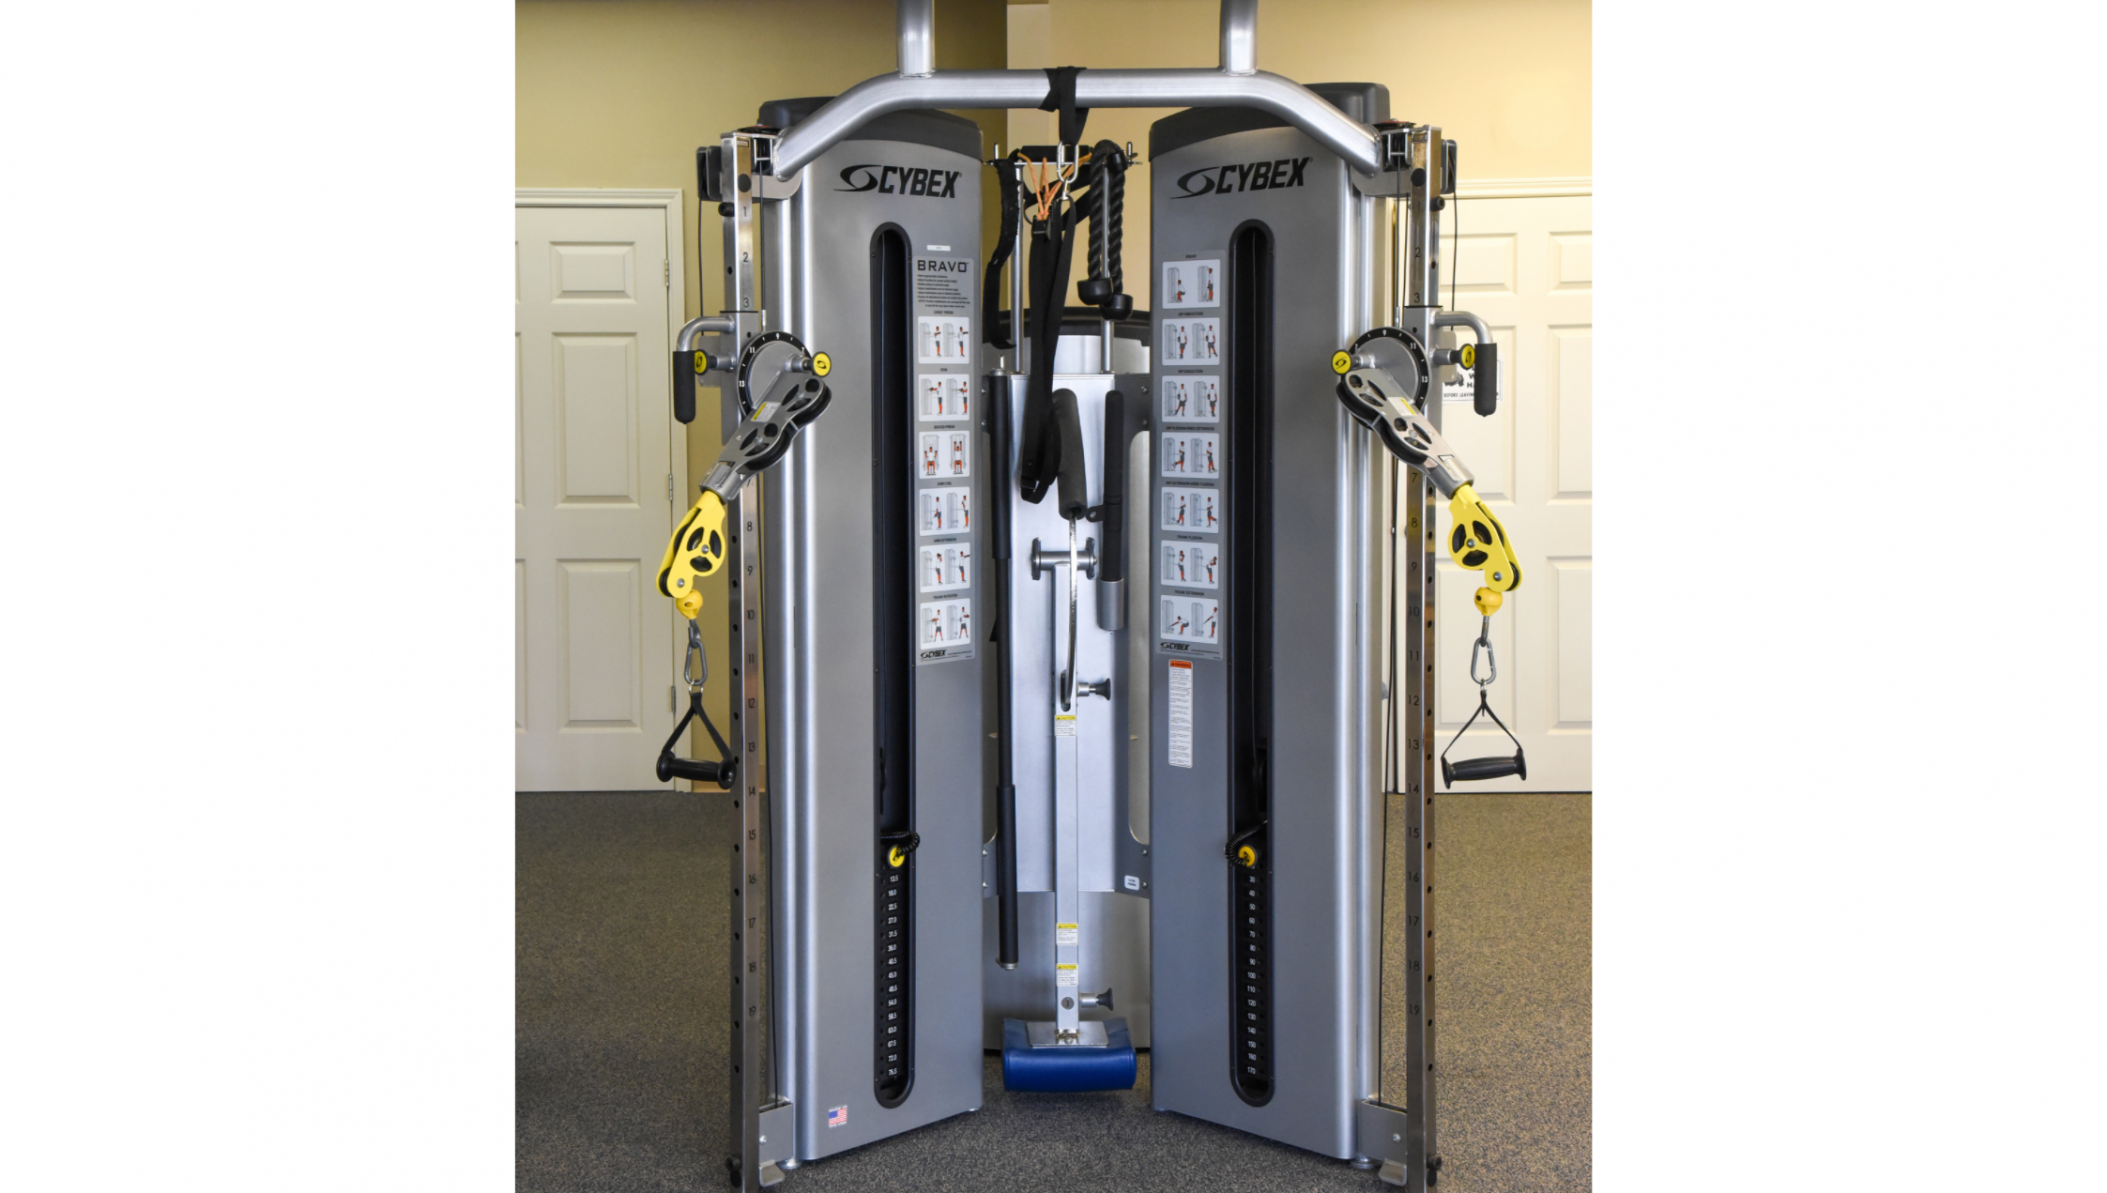 Cybex Bravo Functional Trainer with Stabilizer Pad and Adjustable Pulley Brackets.